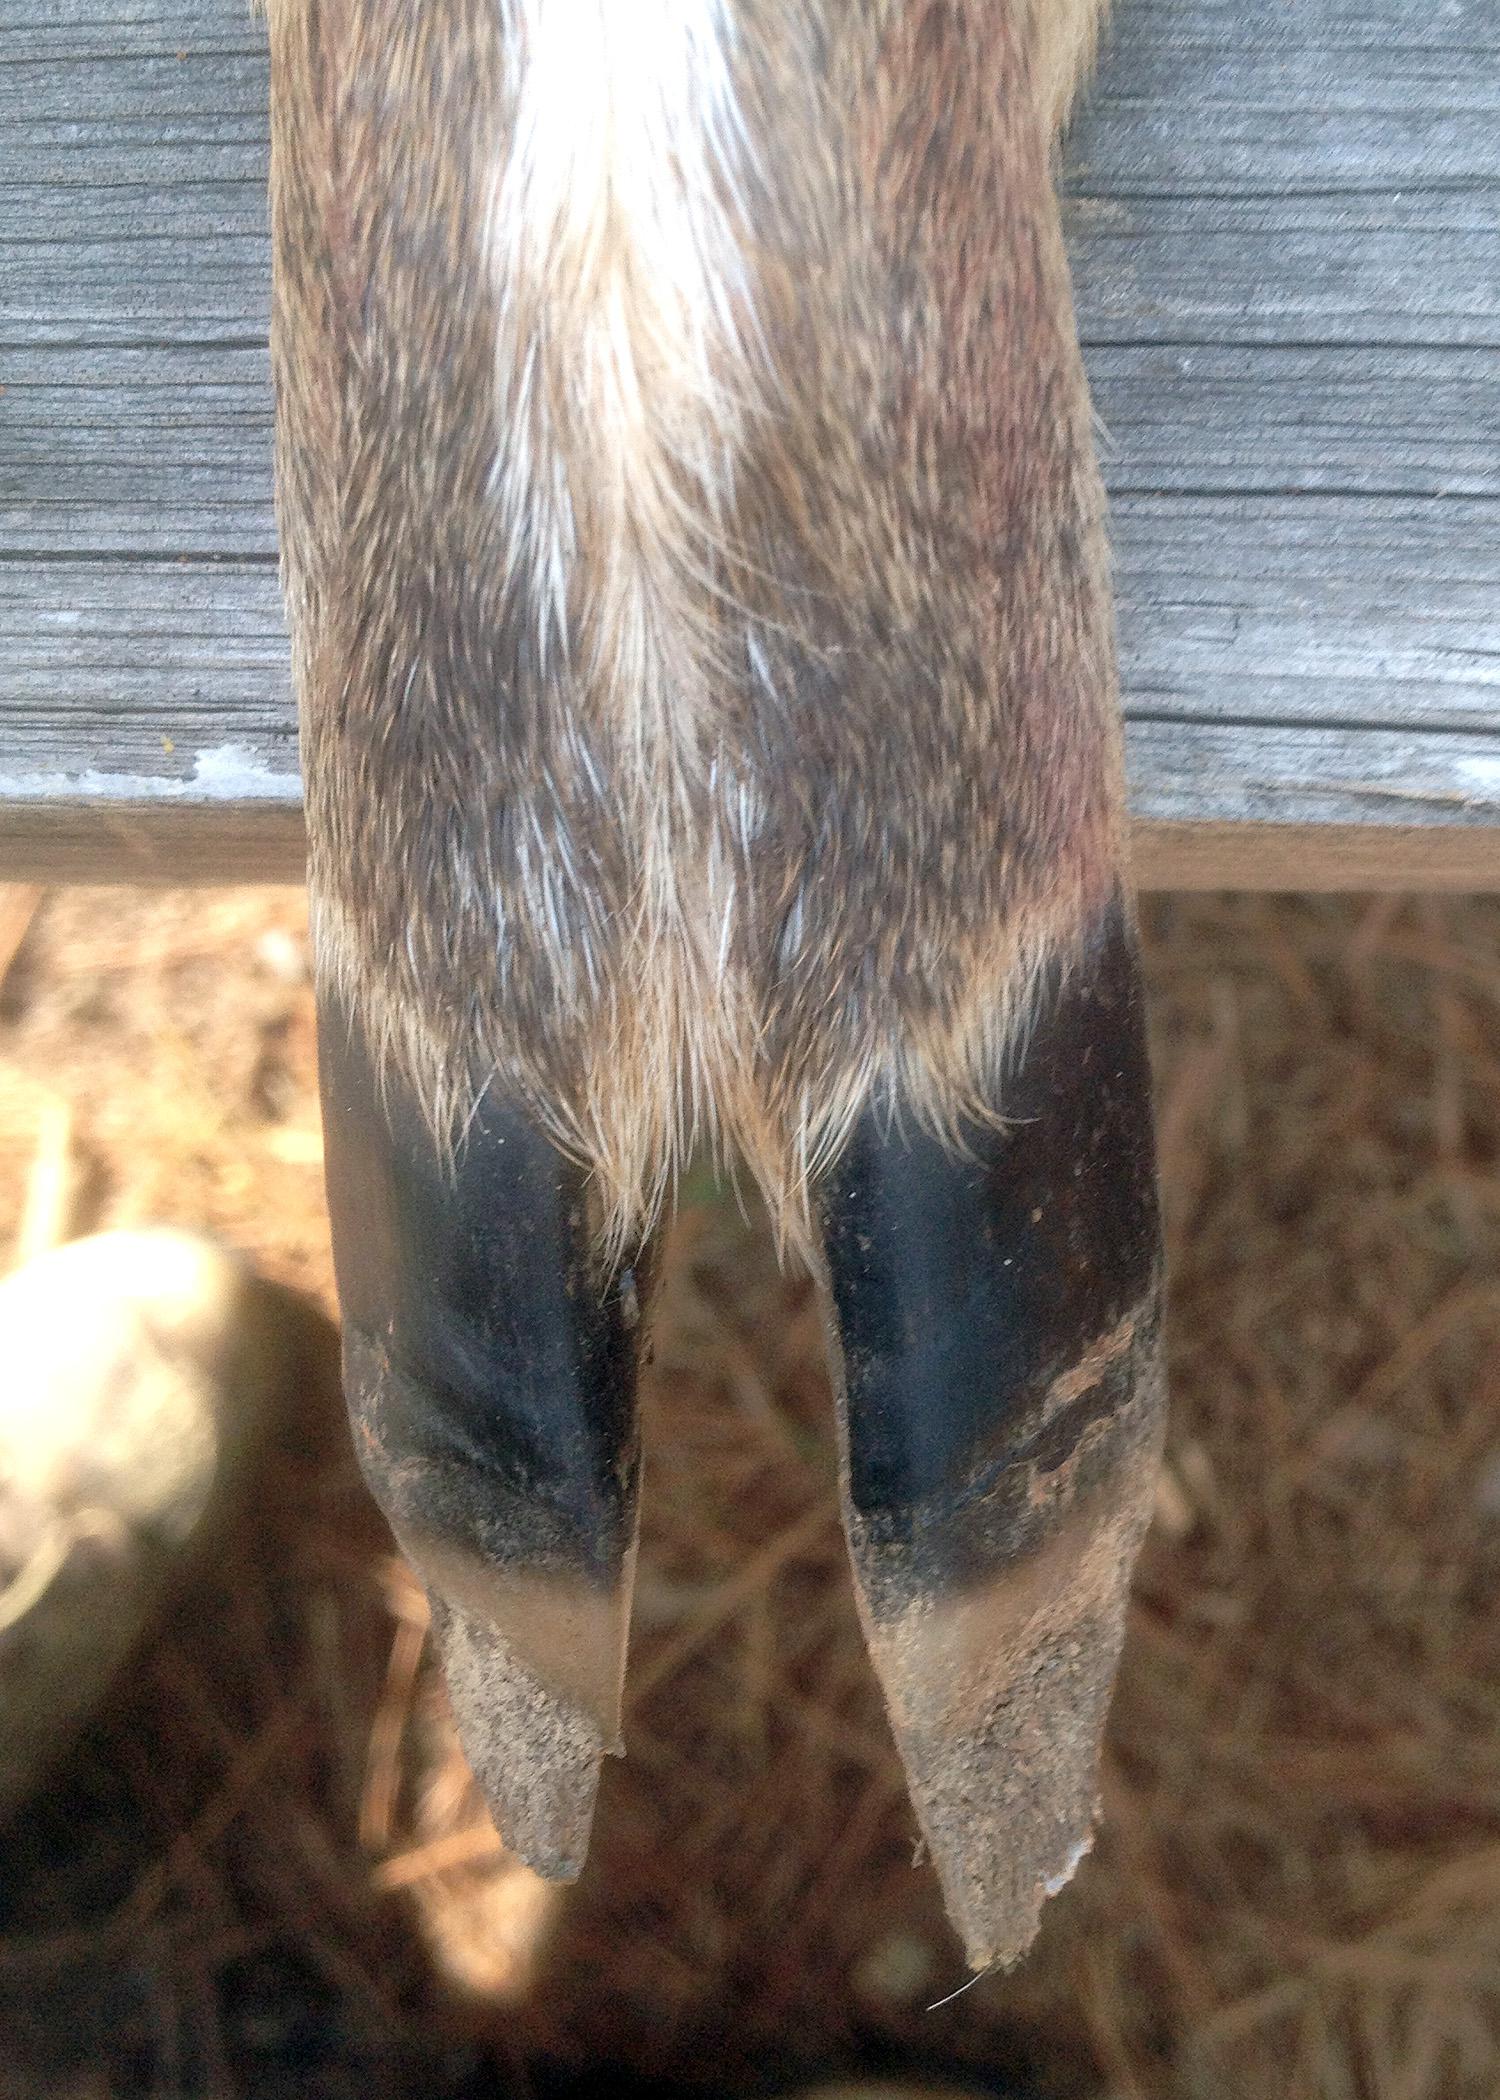 Damaged, broken or cracked hooves indicate the deer contracted hemorrhagic disease, caused by either the epizootic hemorrhagic disease virus or bluetongue virus. (Photo by MSU Extension Service/Bronson Strickland)